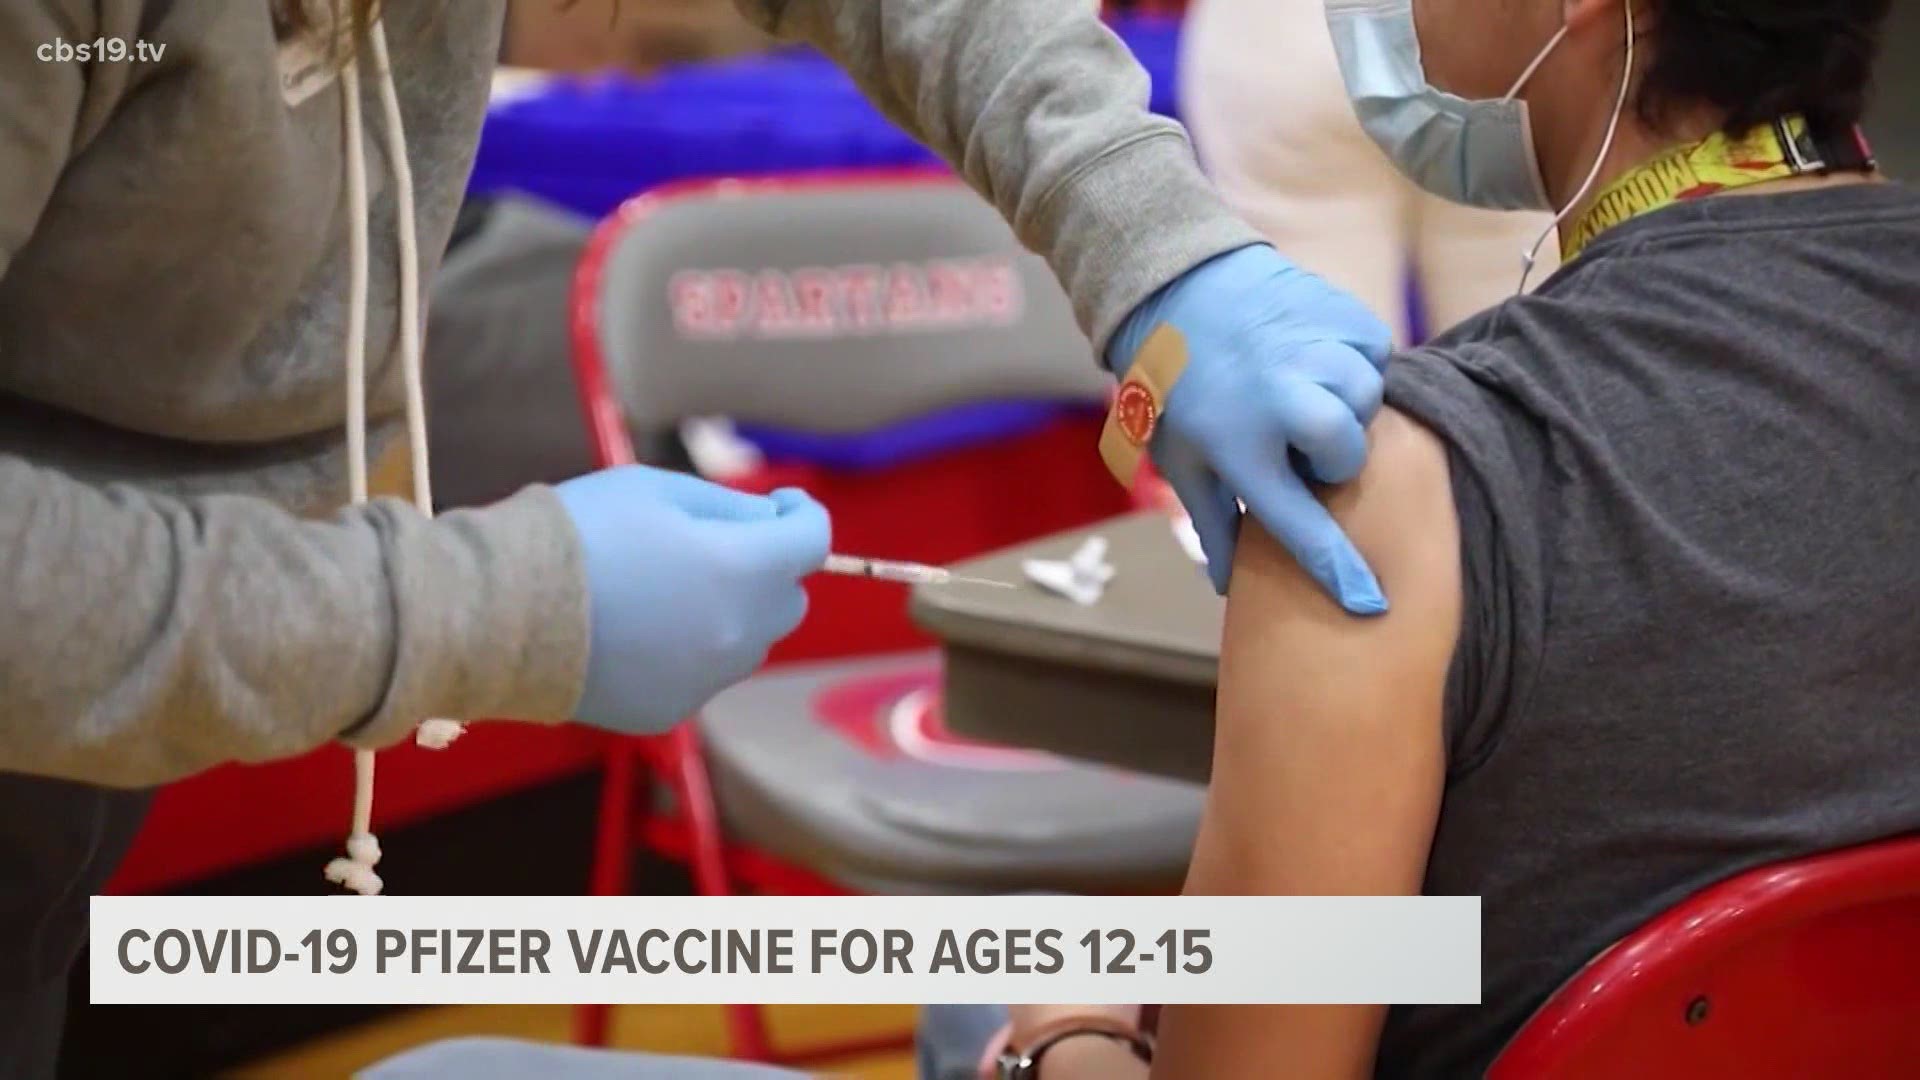 The CDC has cleared the way all 12 to 15 year olds to get Pfizer's COVID vaccine.